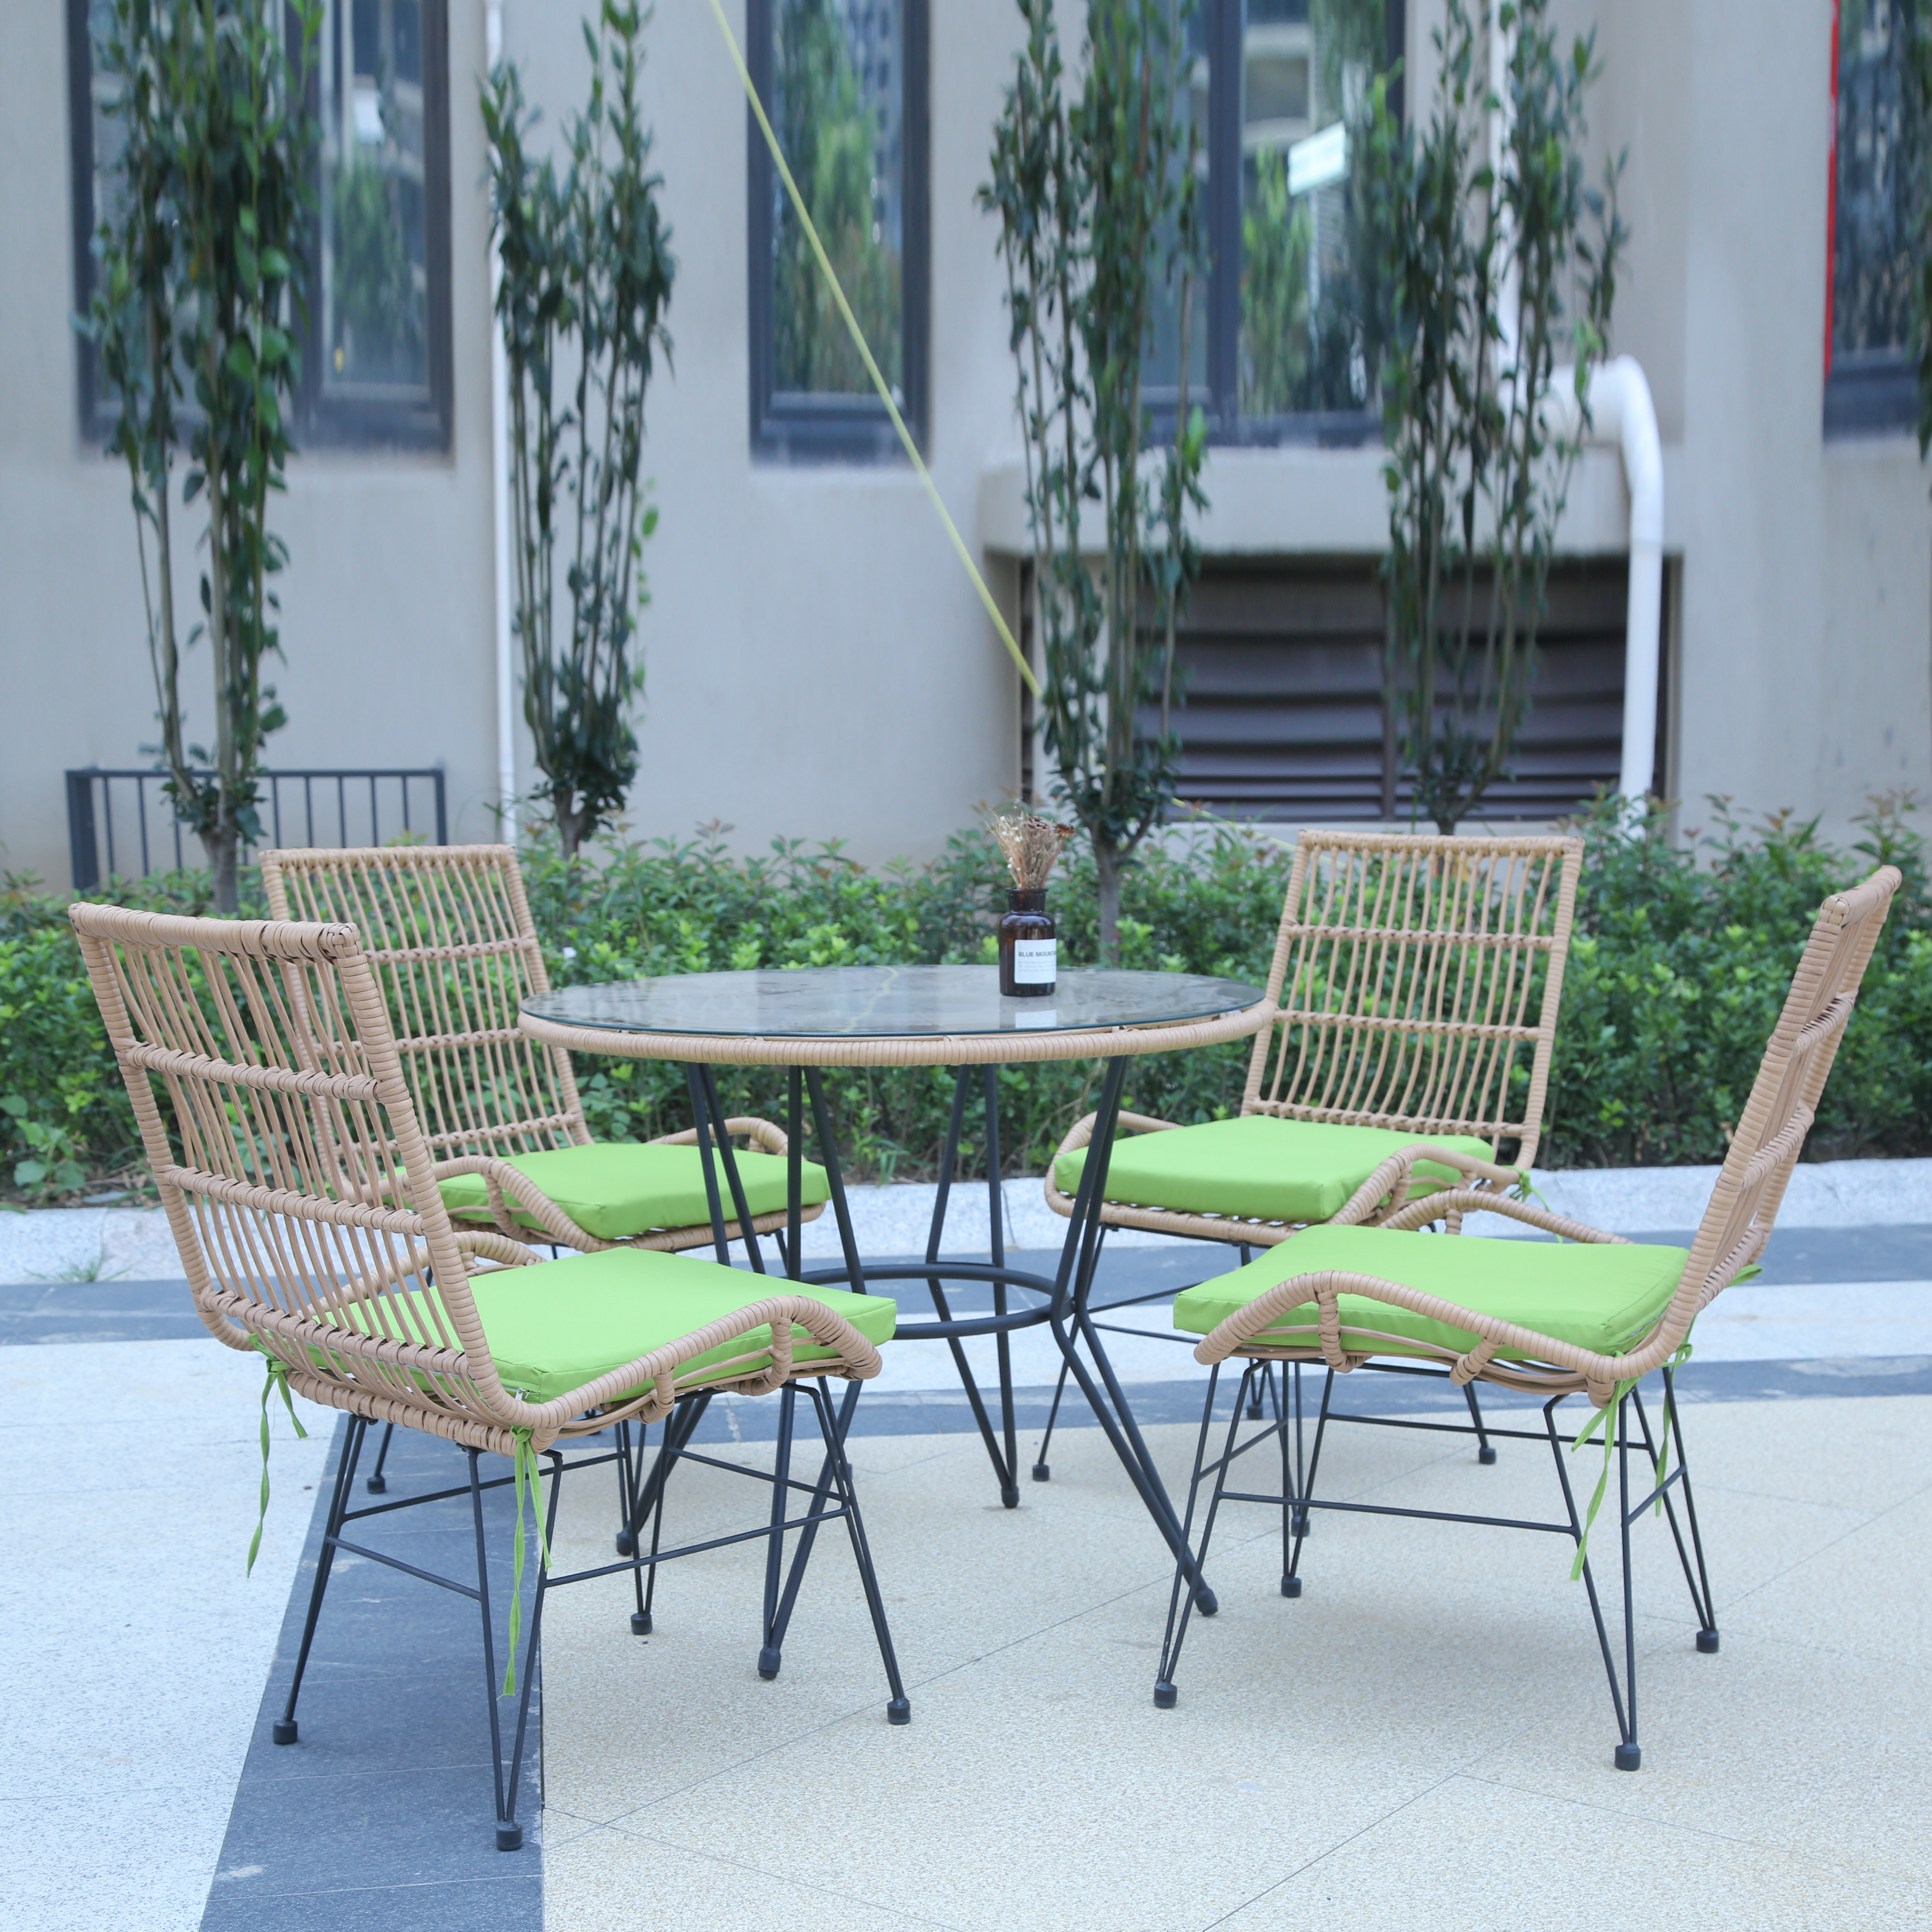 Which kind of outdoor furniture is more popular?